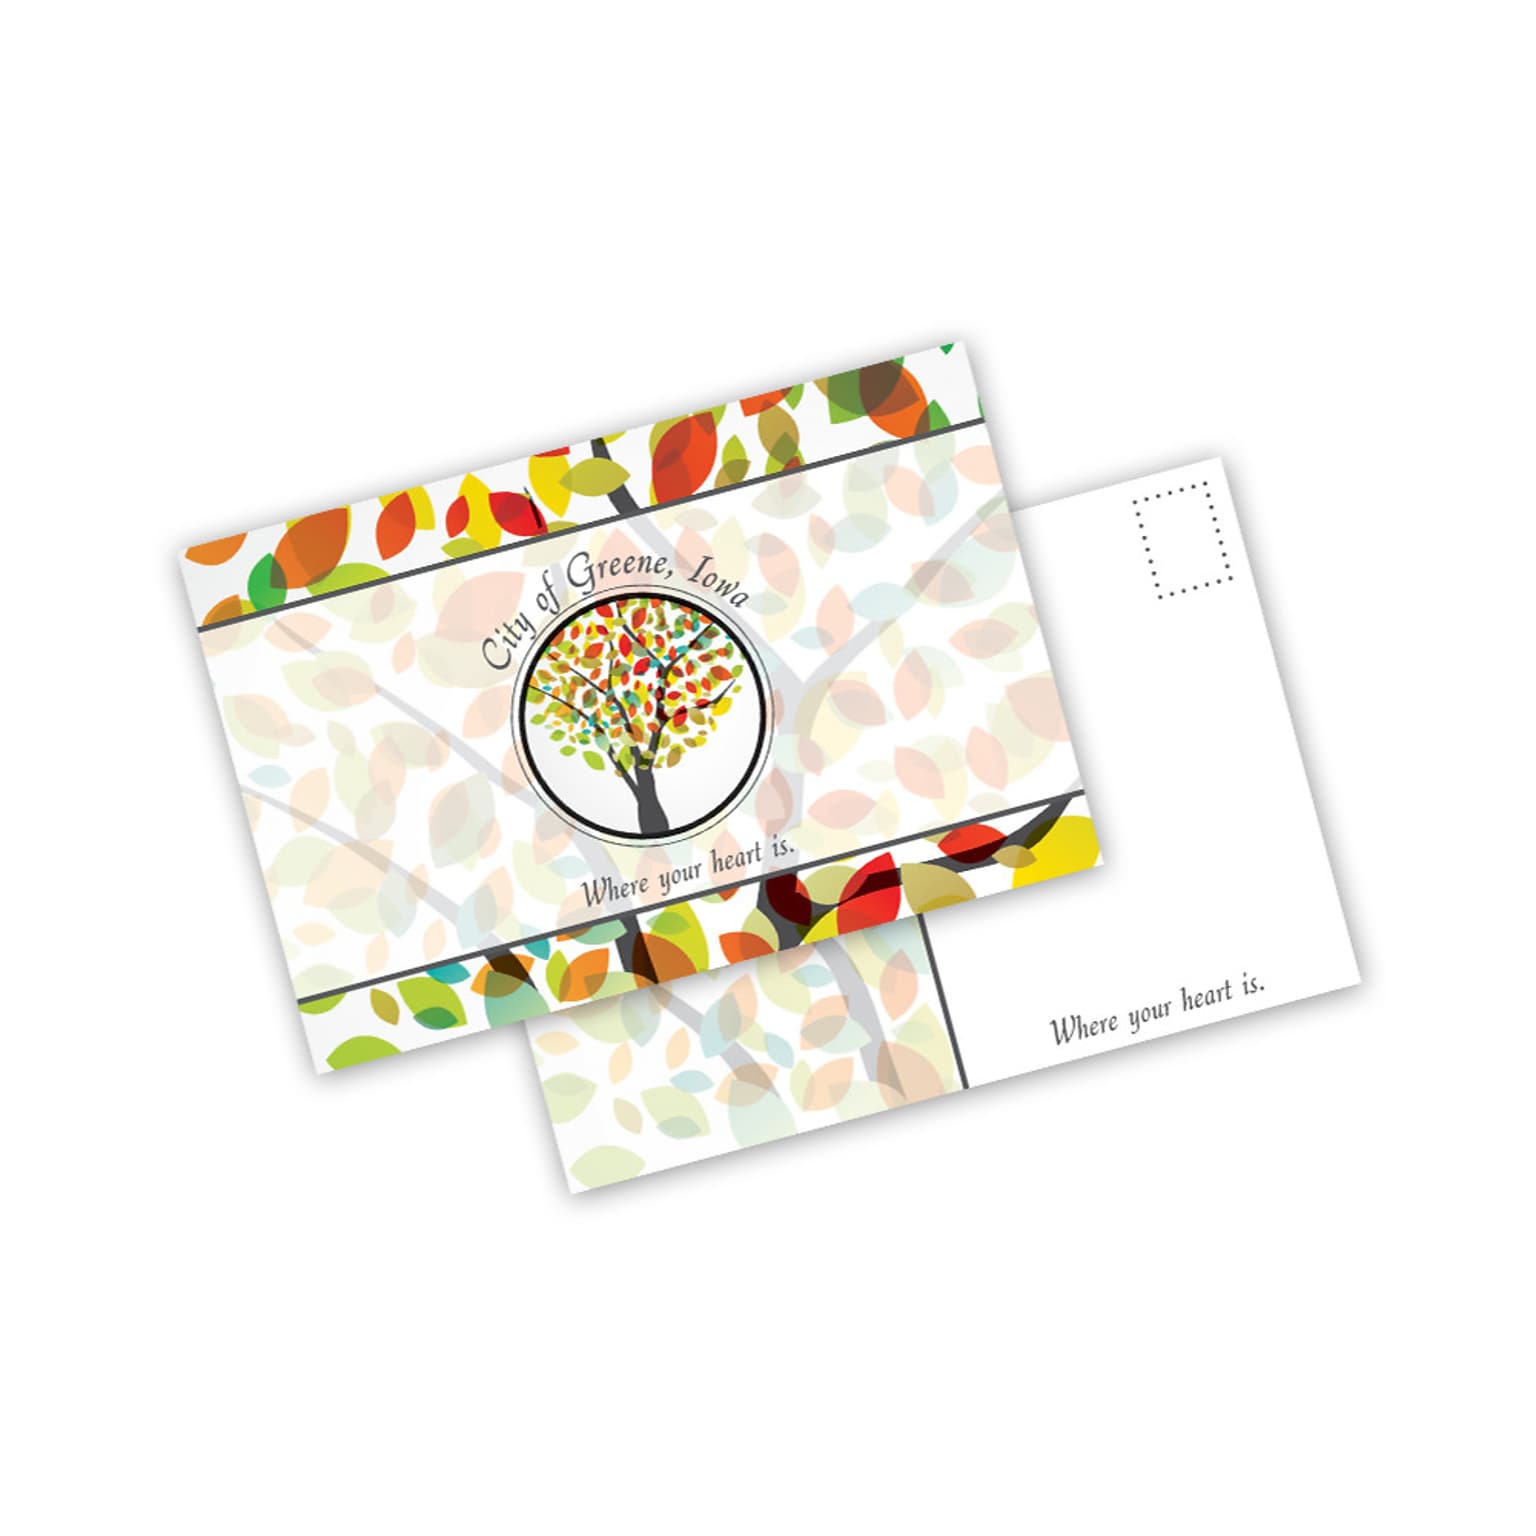 Custom Full Color Postcards, 4 x 6, 14 pt. Uncoated Stock, 2-Sided, 100/Pk